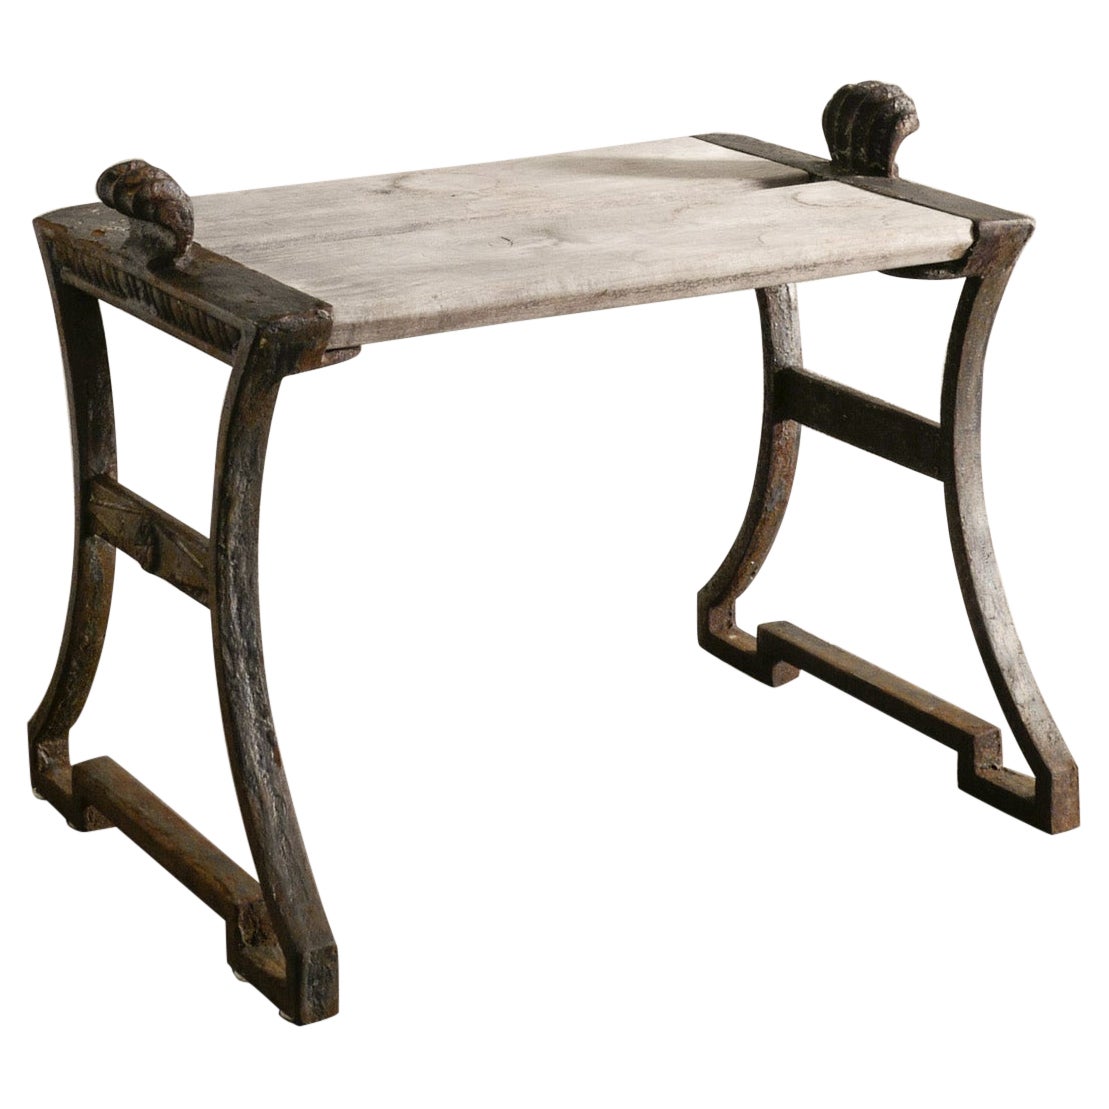 Swedish Bench by Folke Bensow in Cast Iron & Pine for Näfveqvarns Bruk, 1920s For Sale